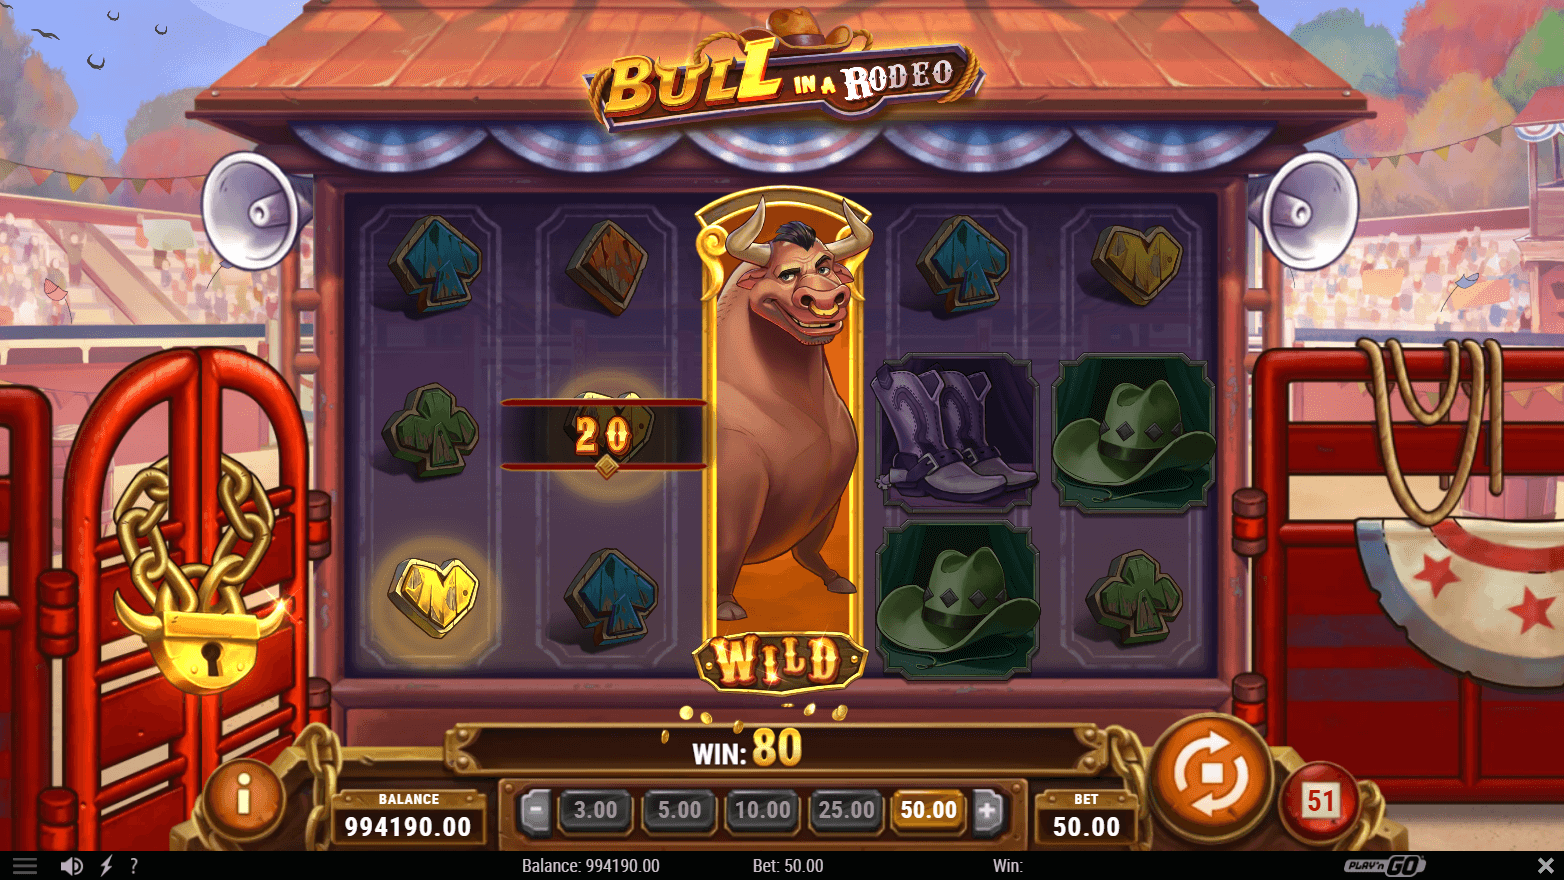 Bull in a Rodeo slot